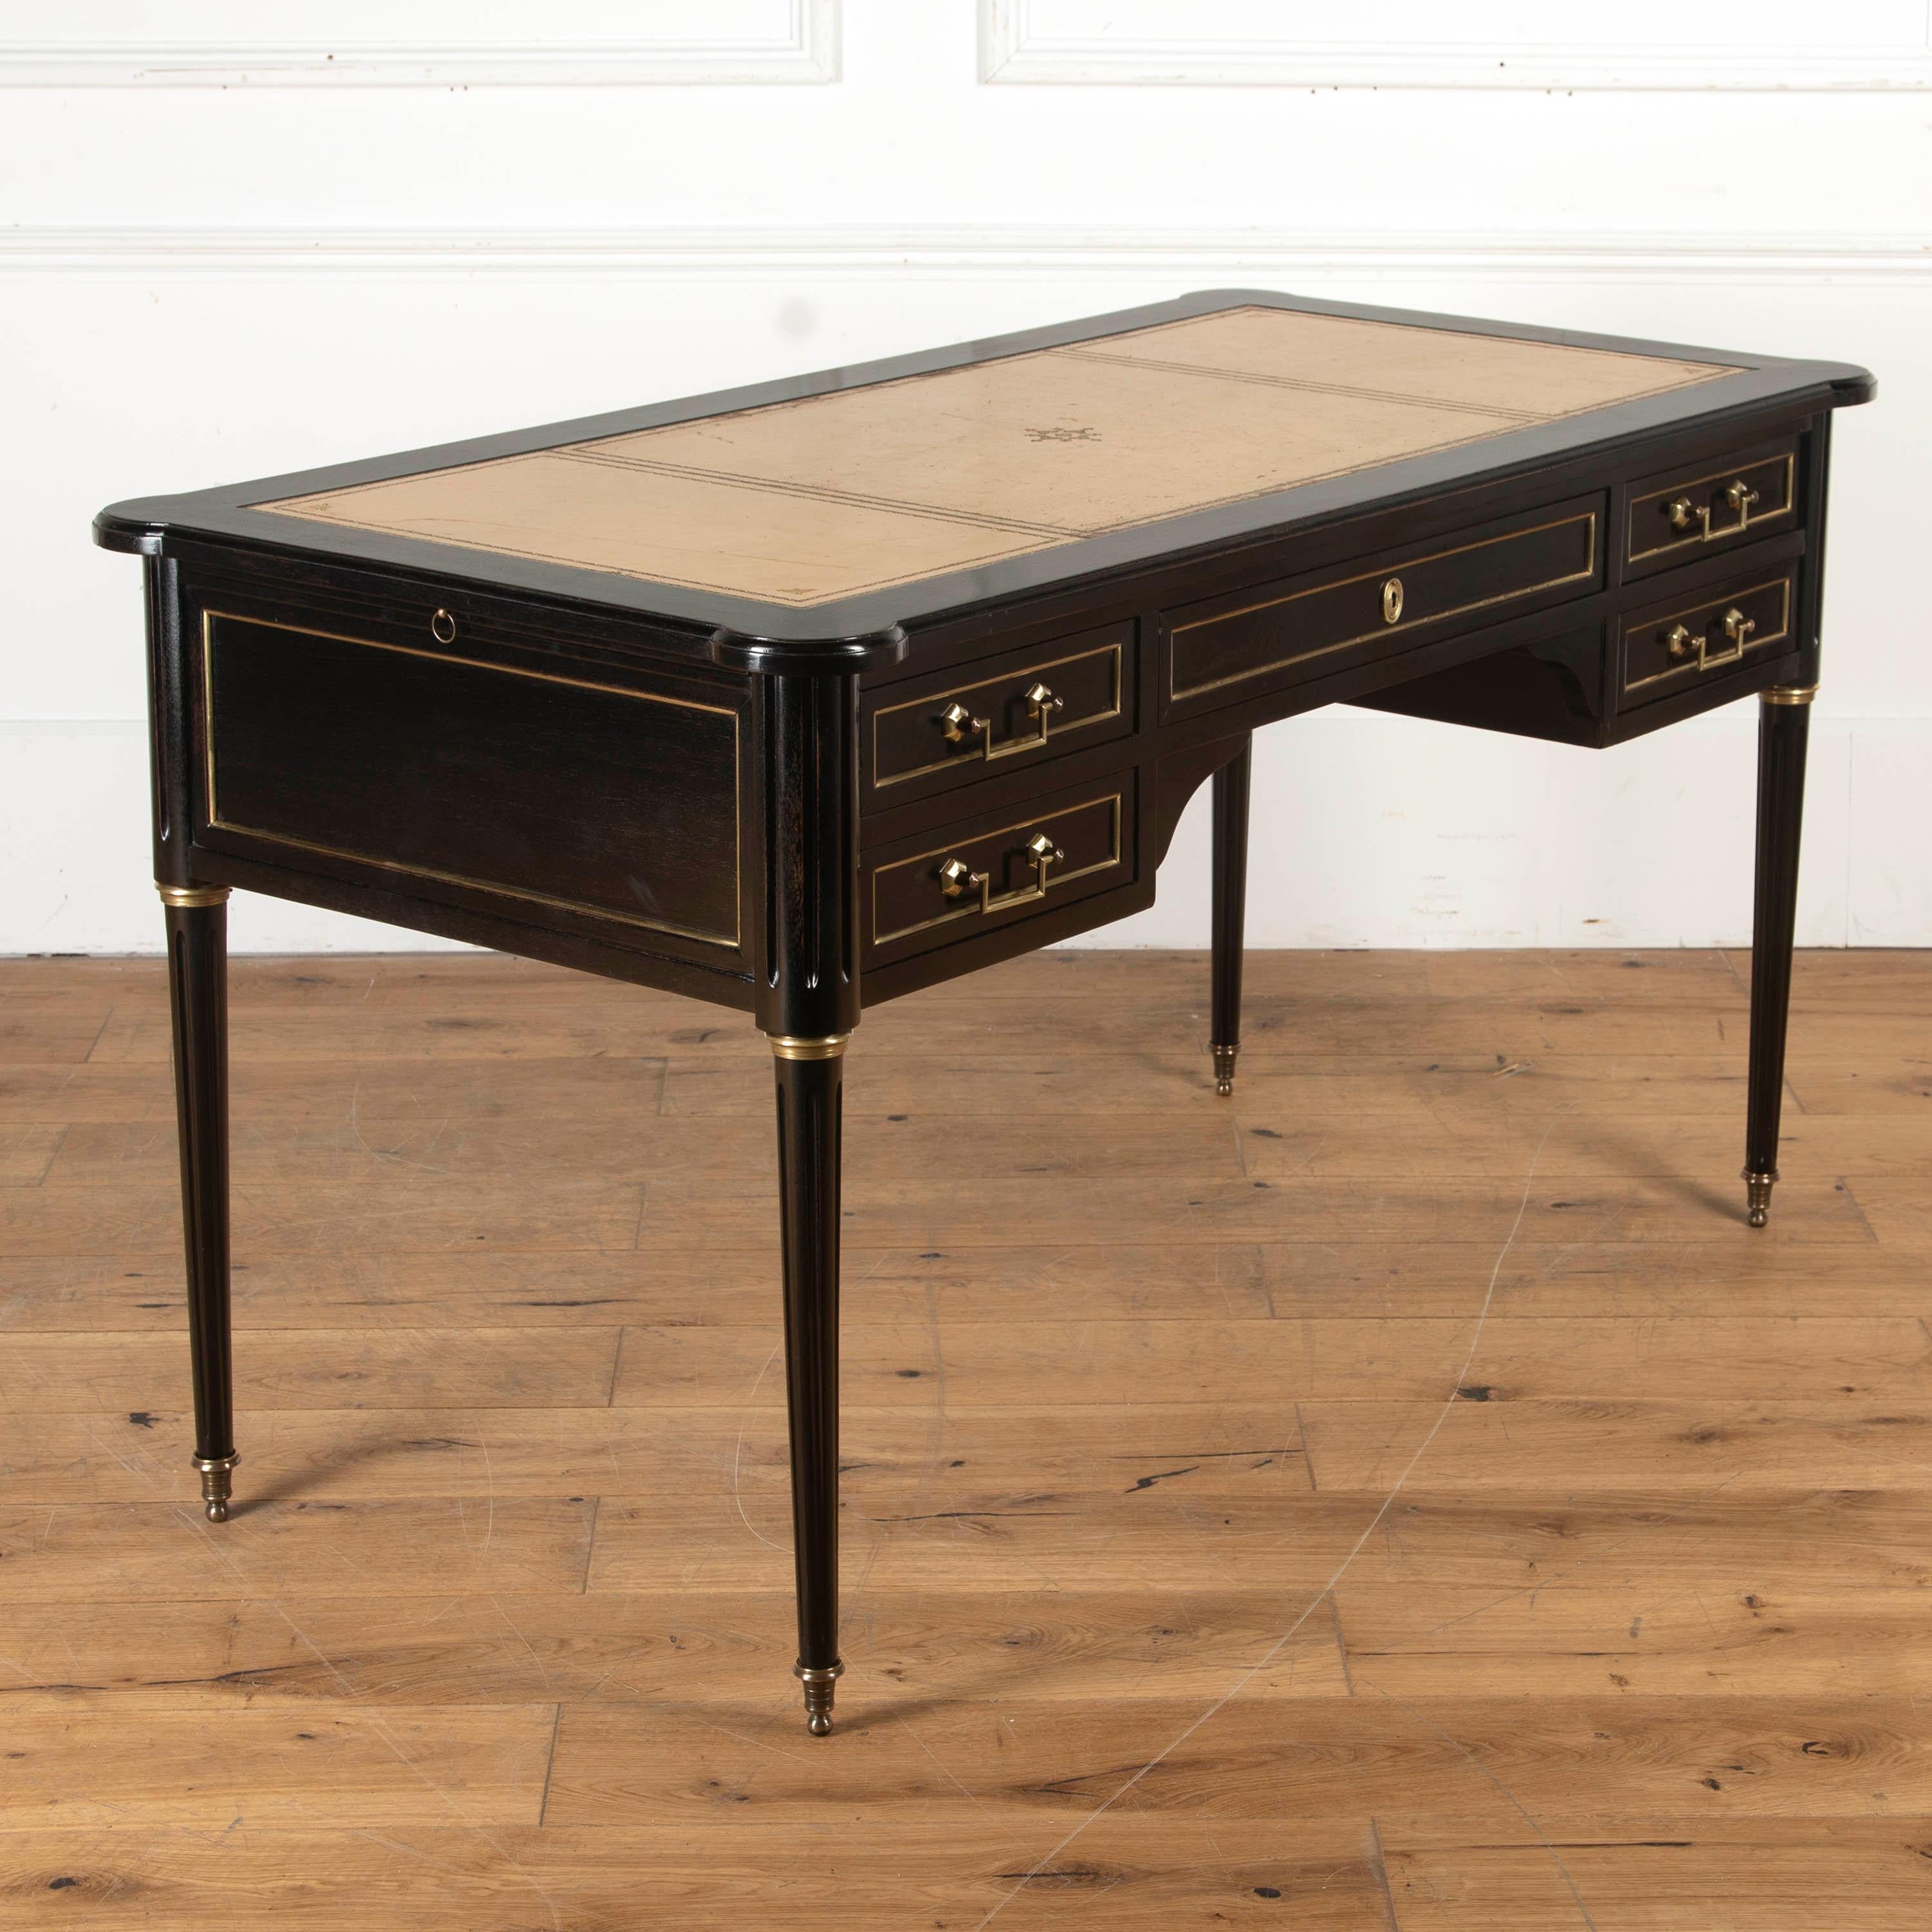 Ebonised writing desk.

Of French origin and dating from the Early 20th Century, Circa 1930's, this ebonised mahogany writing desk has a leather inset top with two drawers to each side. The drawers flank the central kneehole below with a long